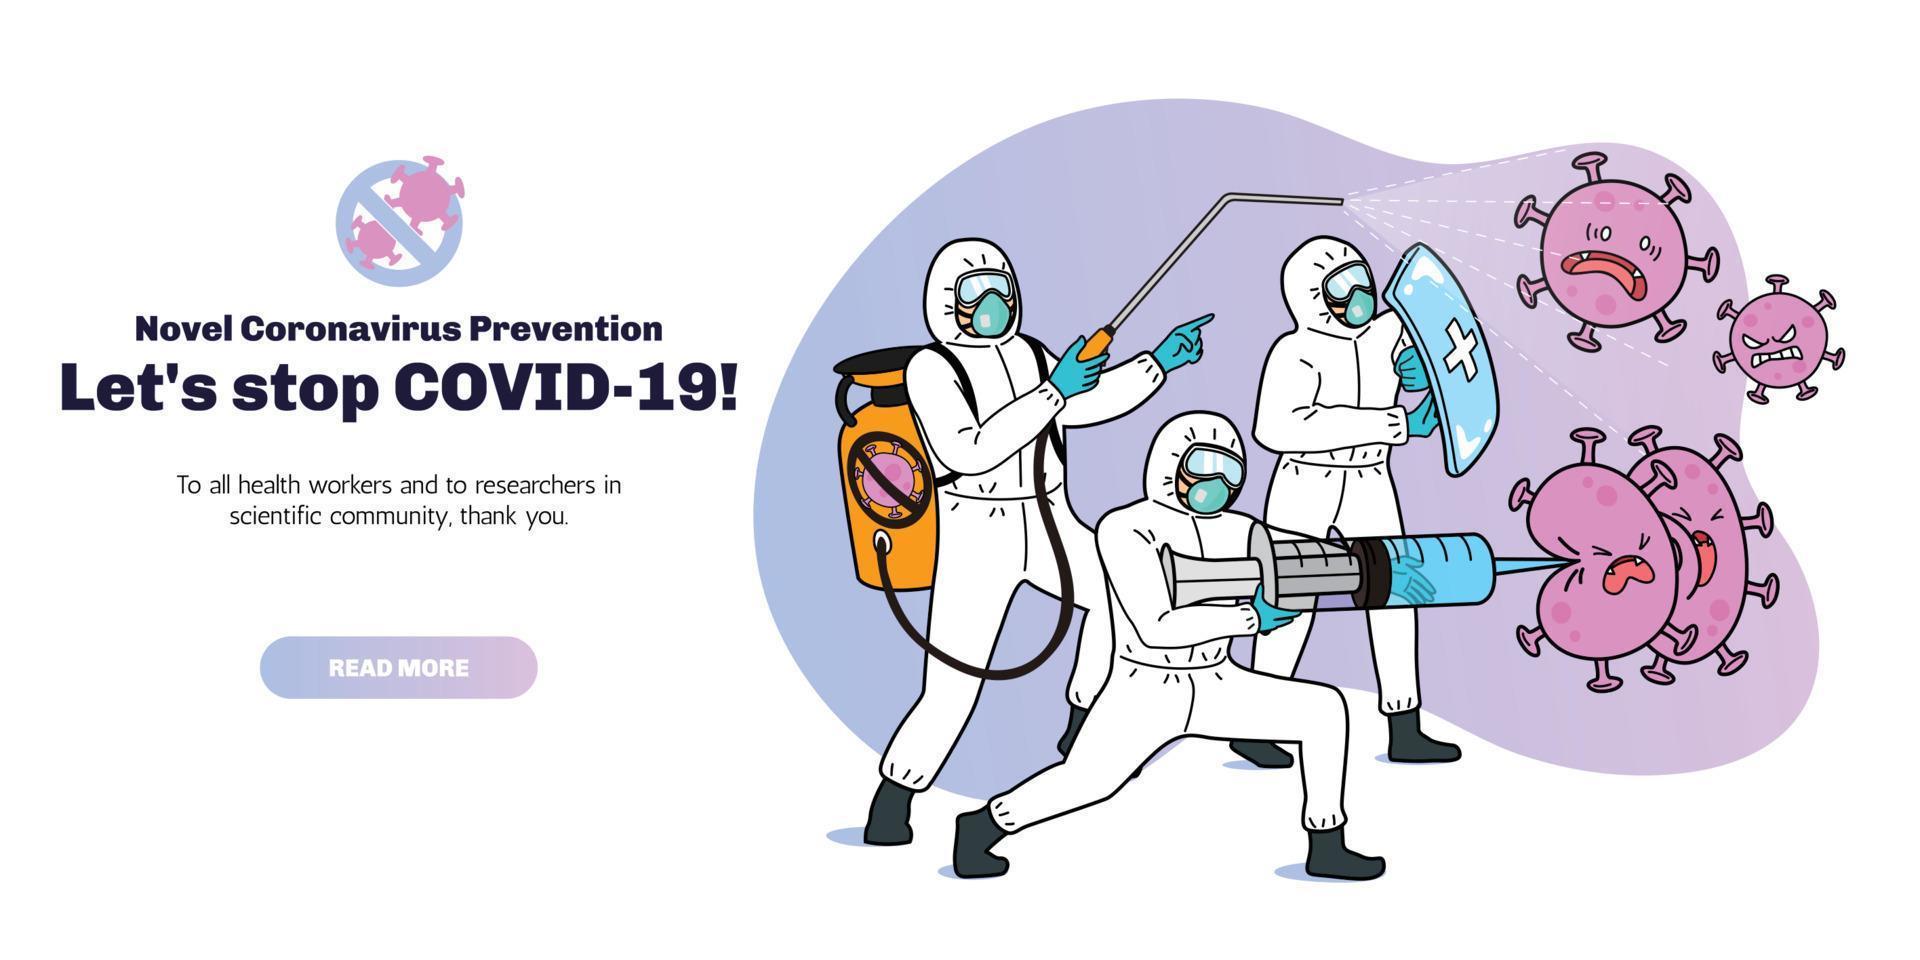 Web banner design for COVID-19 prevention, 3 men in hazmat suit defeating the virus with disinfectant sprayer, syringe and shield vector